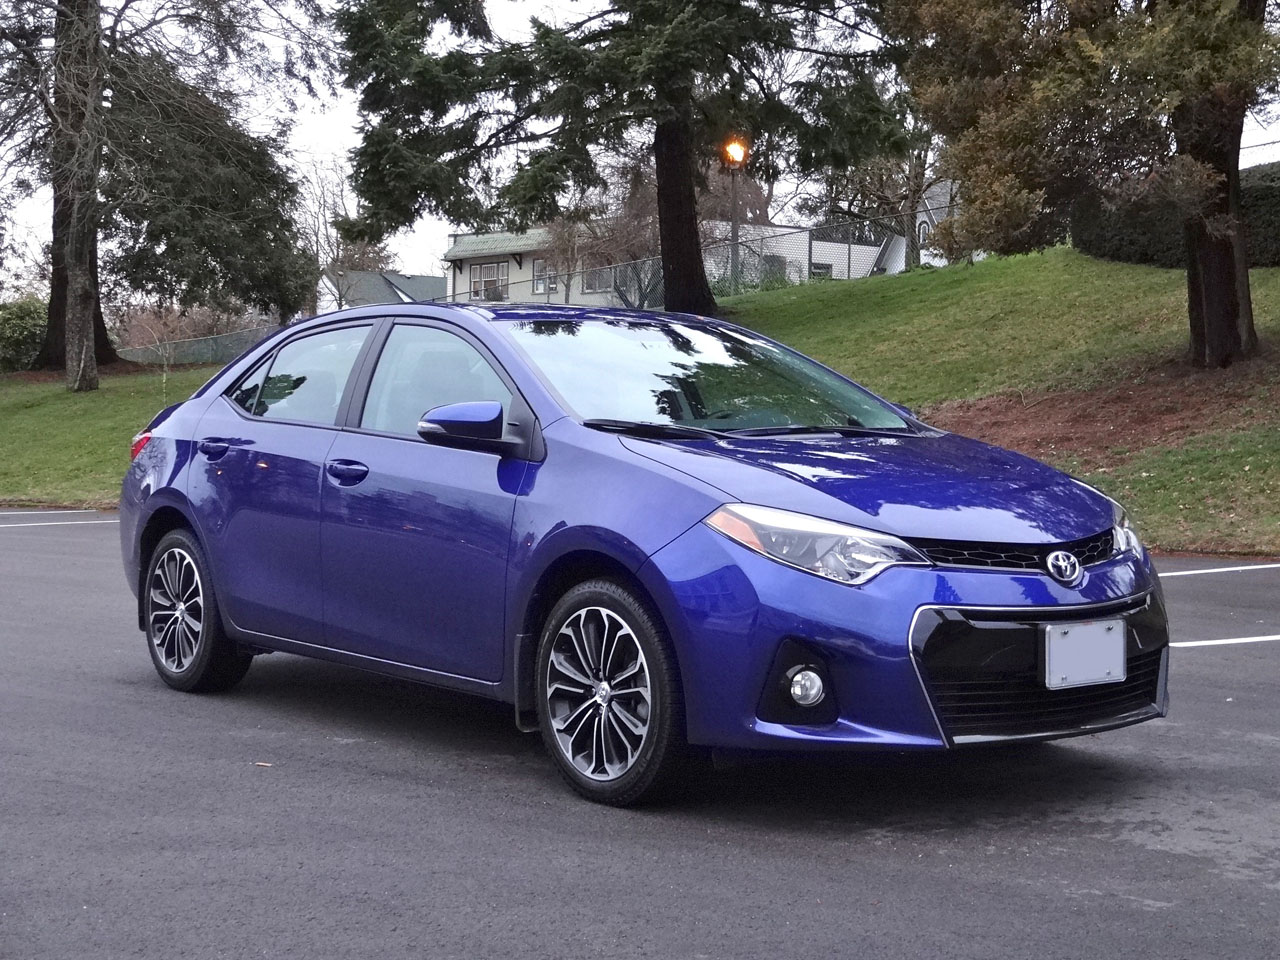 2014 Toyota Corolla S Road Test Review | The Car Magazine